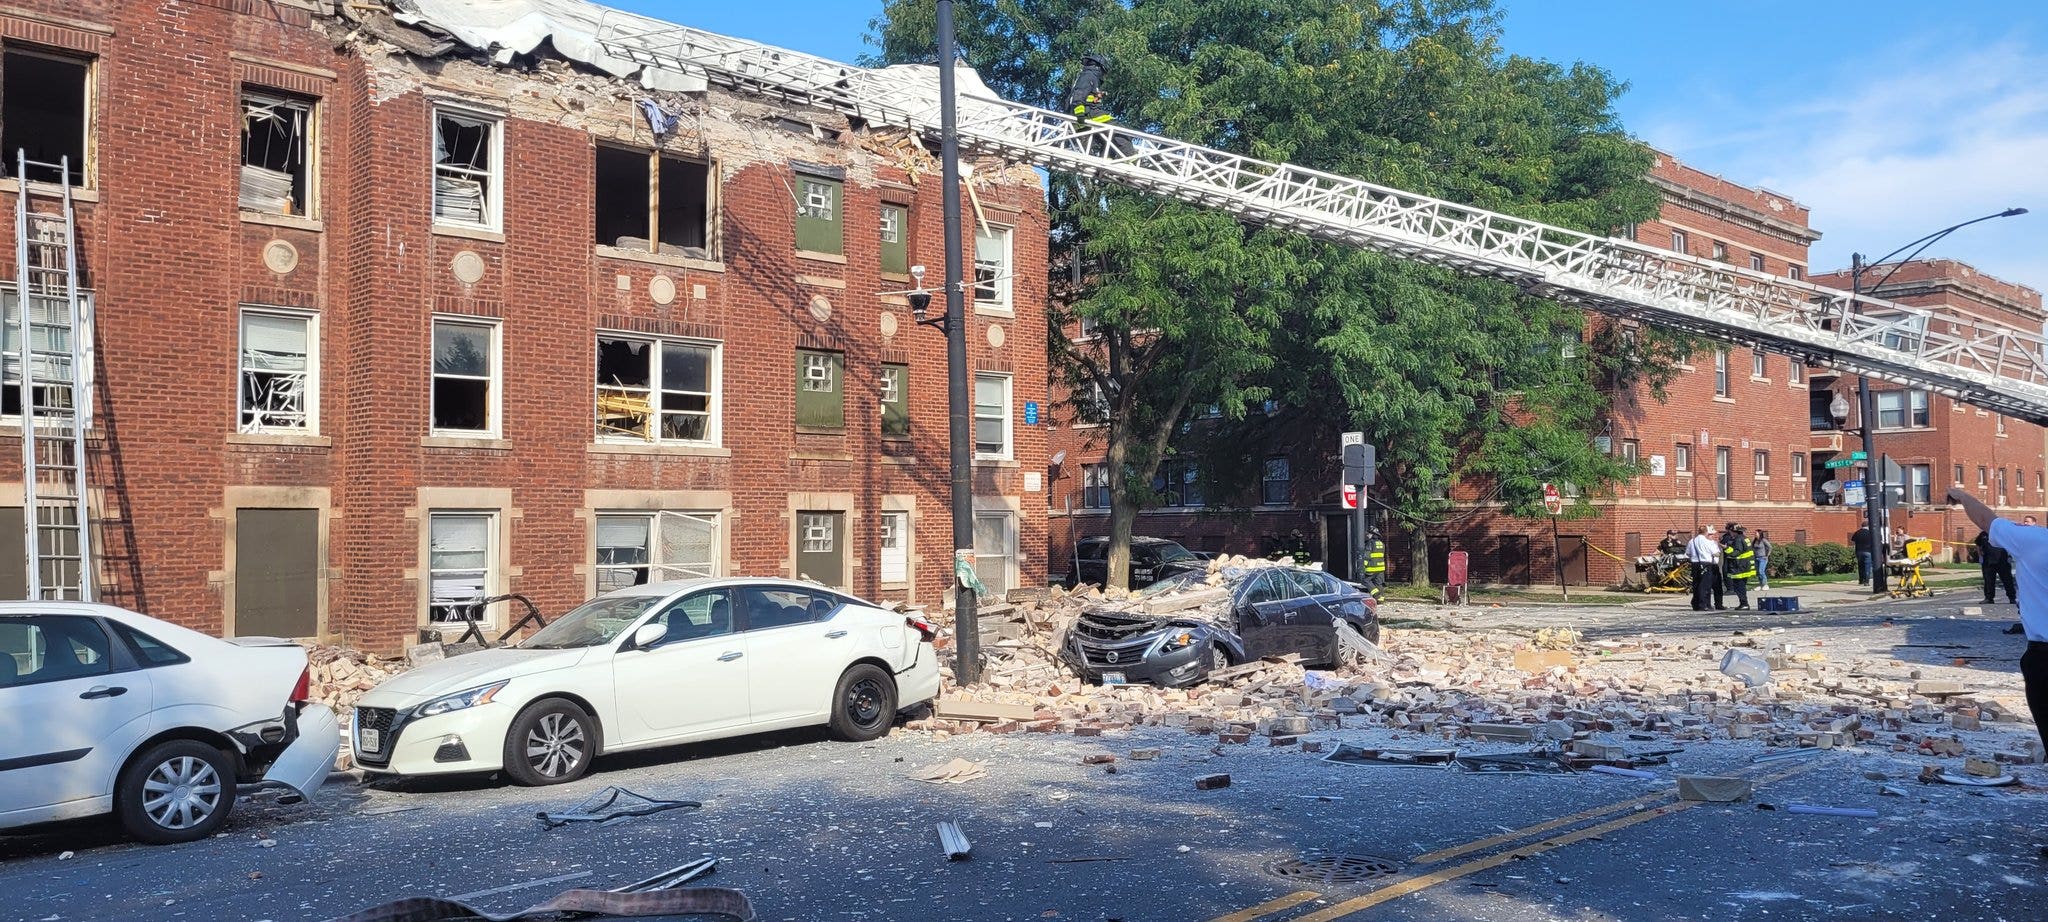 Chicago Fire Department calls for mass casualty bus after explosion at residential building